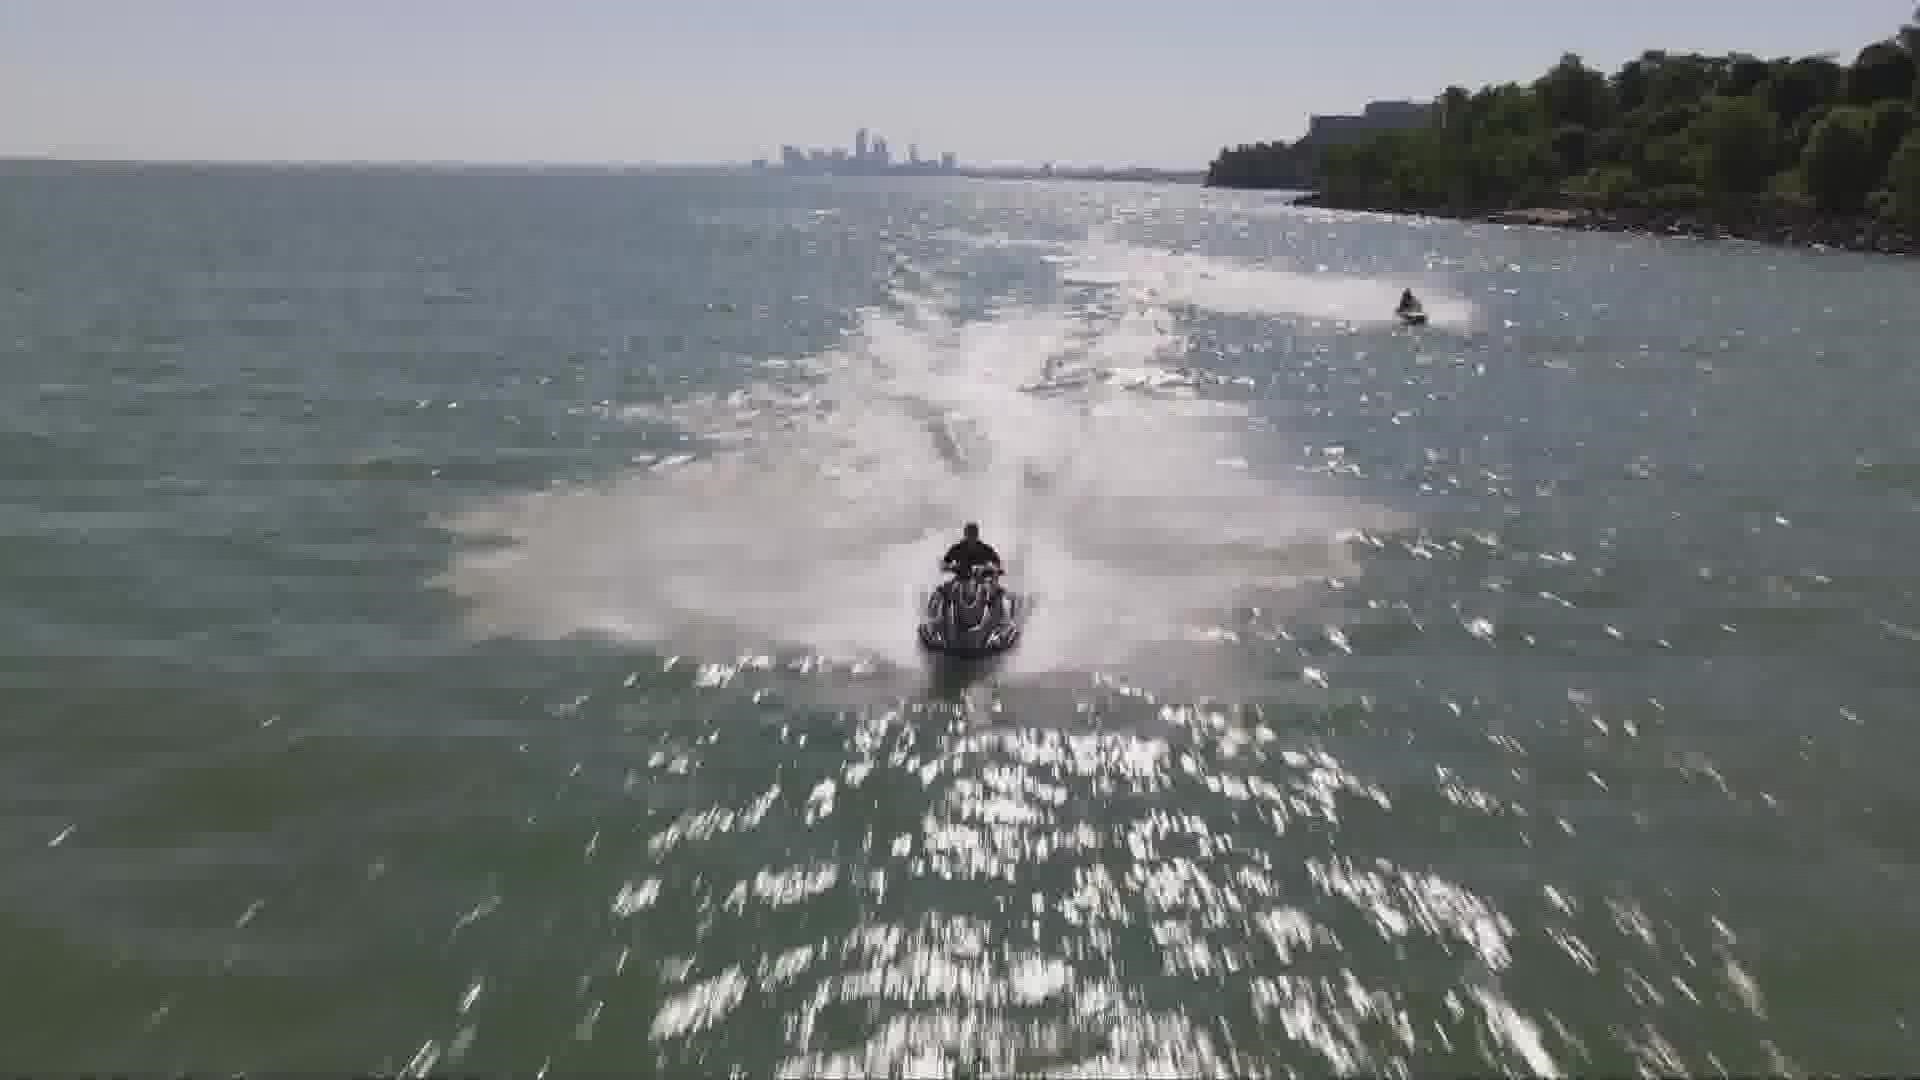 With the help of Rico's Rental in Cleveland, 3News' Austin Love had some fun on the water by riding a jet ski in Lake Erie.